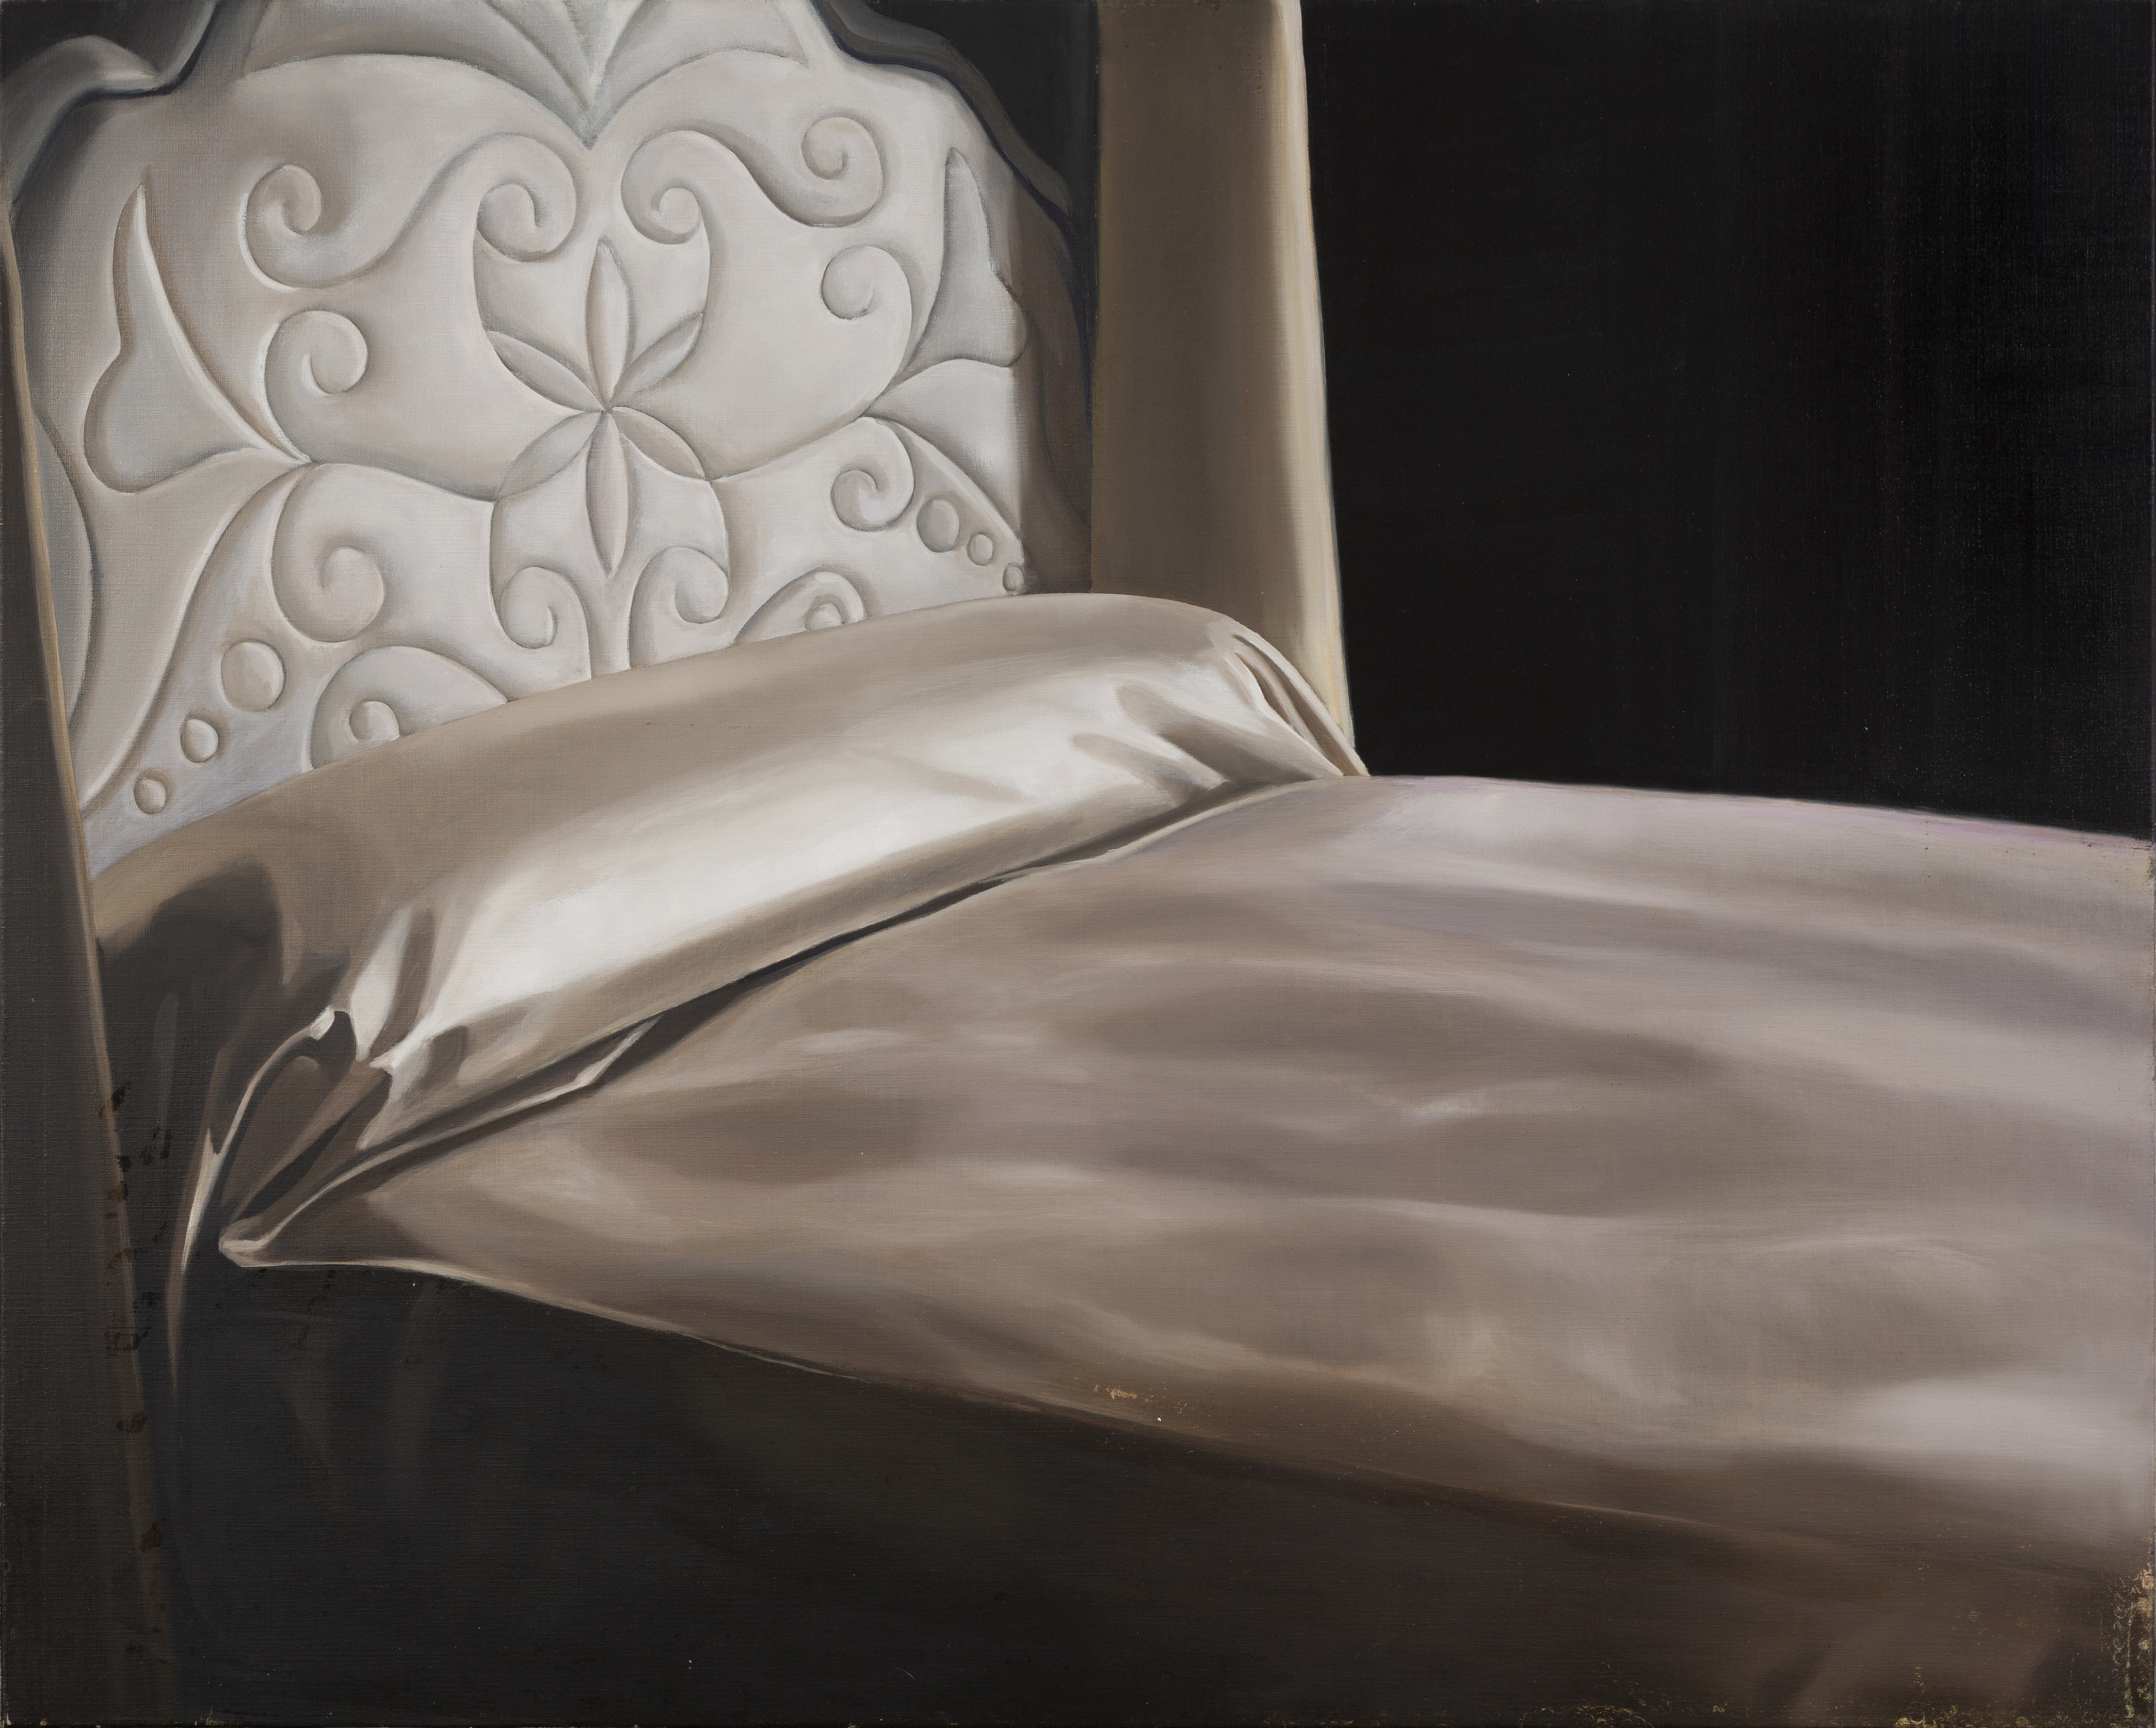 Anne WALLACE, Boudoir 1997, oil on canvas. QUT Art Collection. Donated through the Australian Government's Cultural Gifts Program by James and Jacqui Erskine, 2019